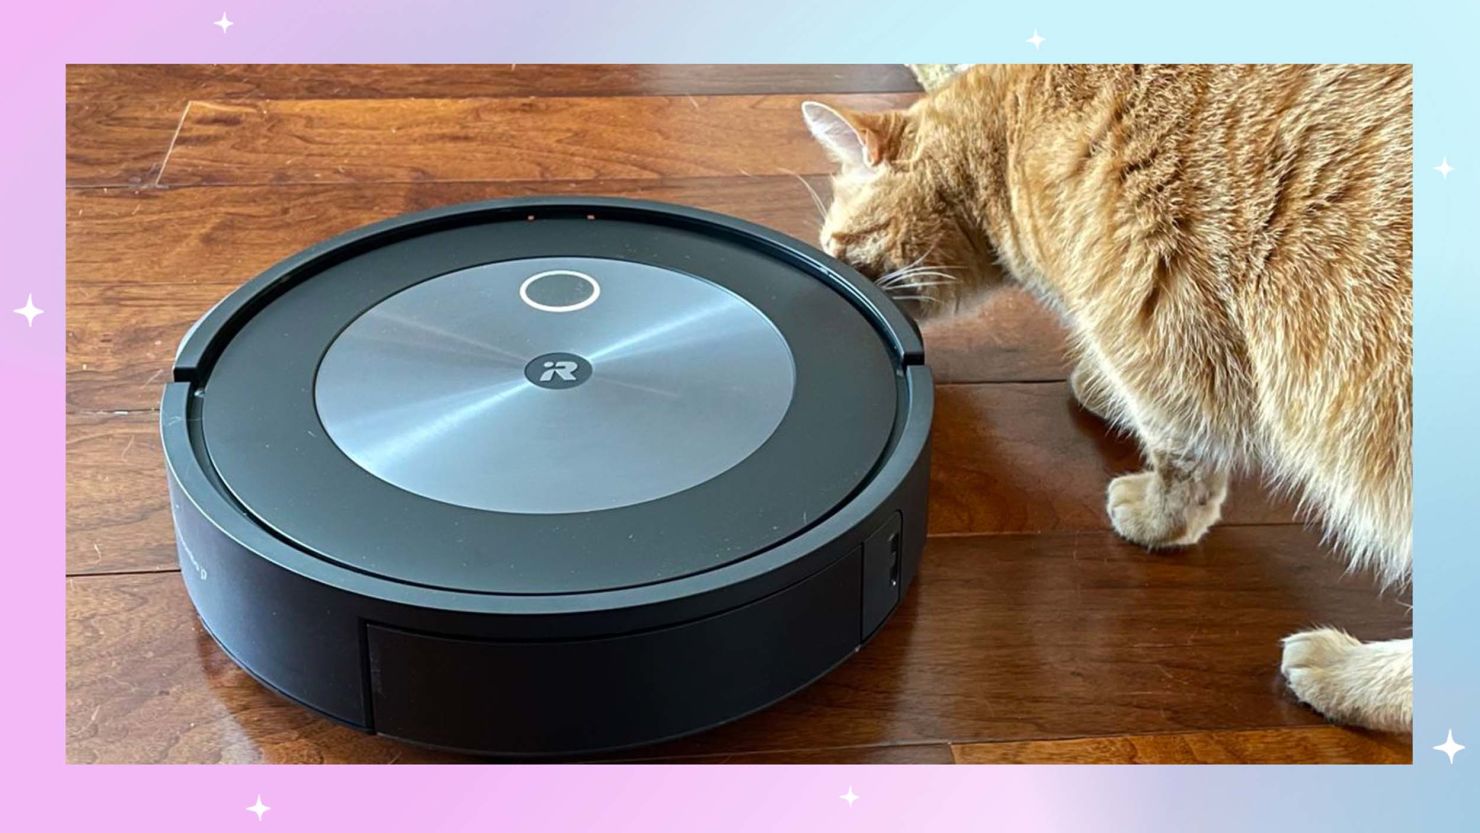 iRobot Roomba Cyber Monday deals: Up to $400 off